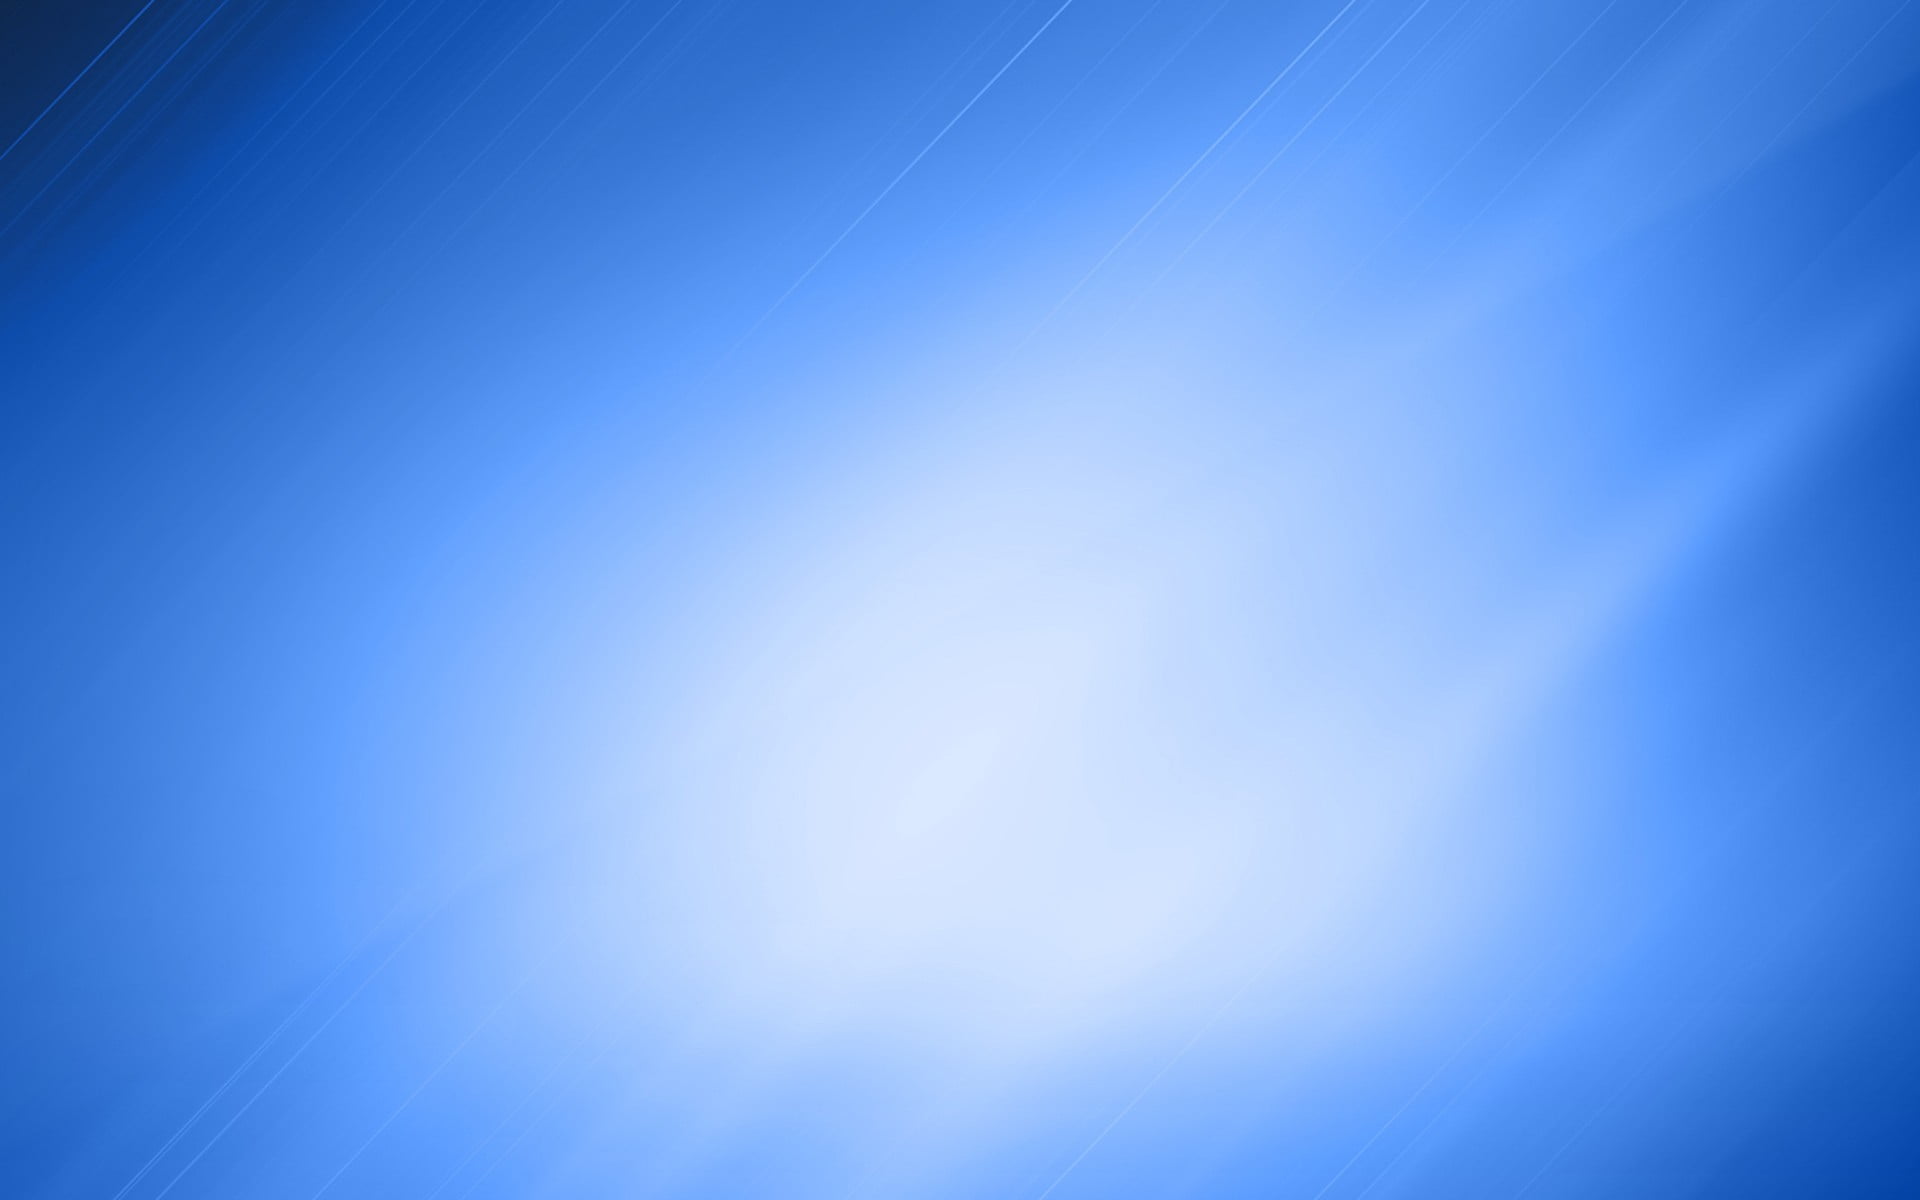 blue lights, gradient, sky, backgrounds, clear sky, abstract